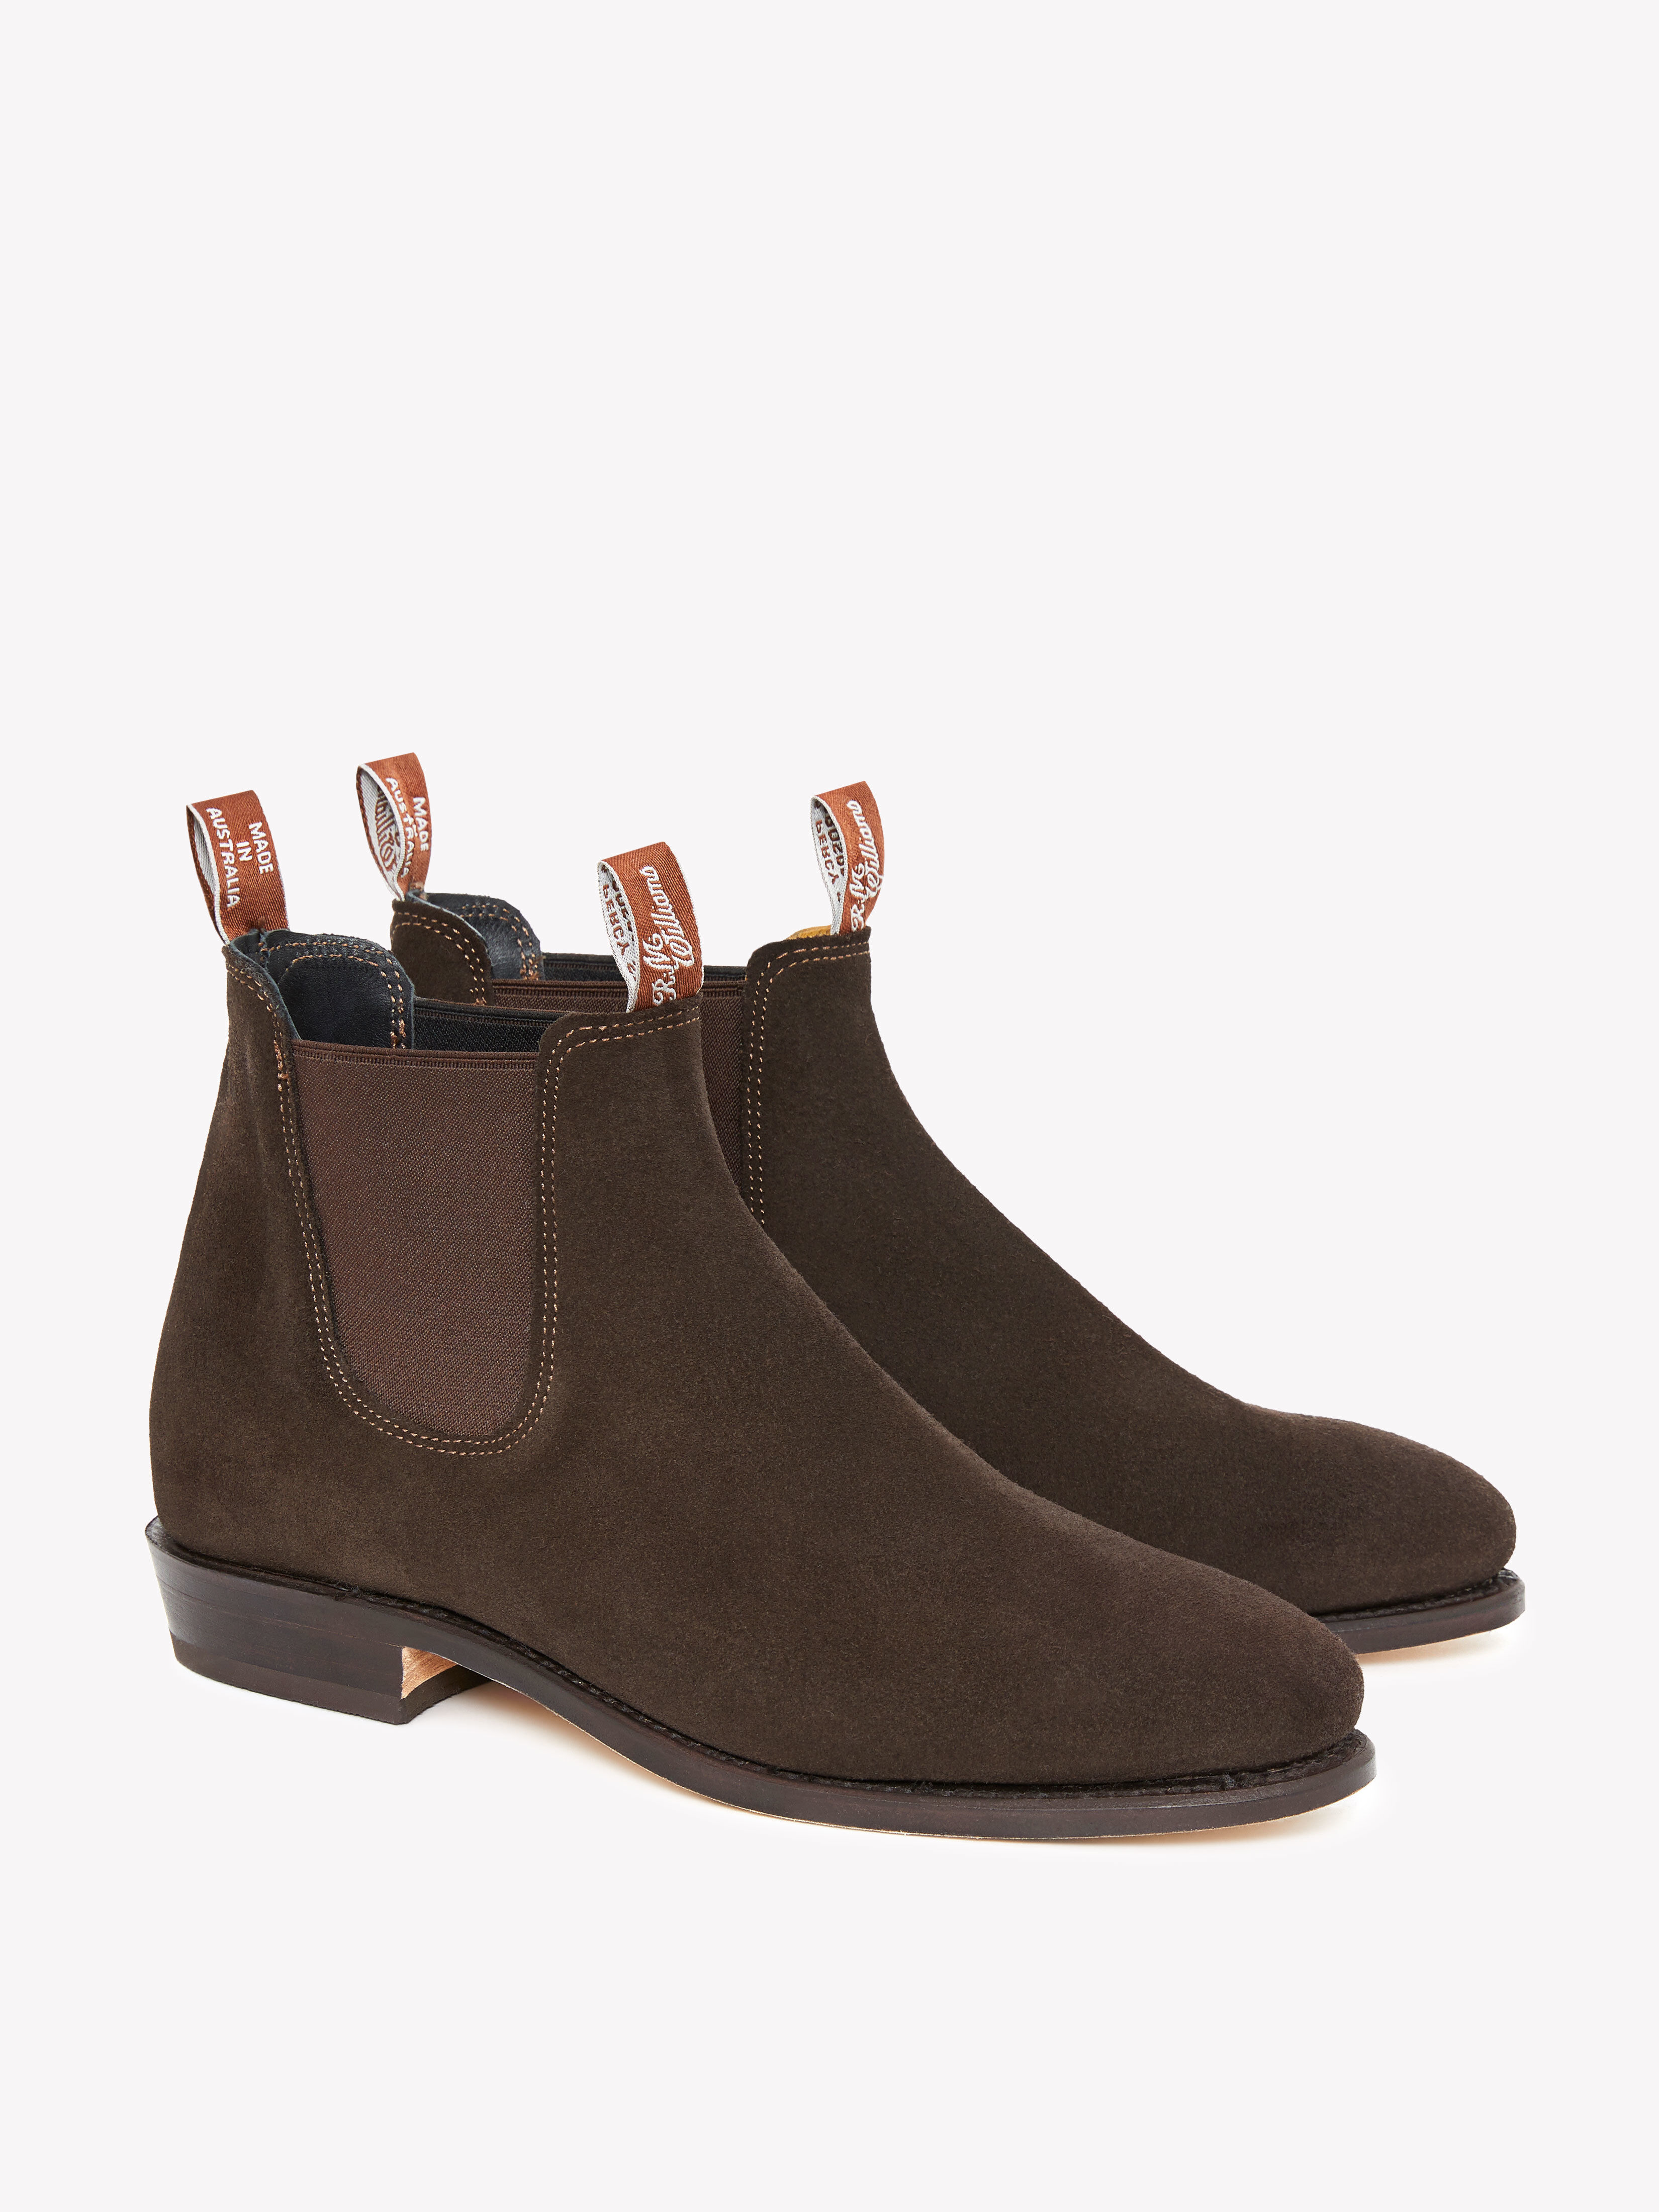 womens suede boots